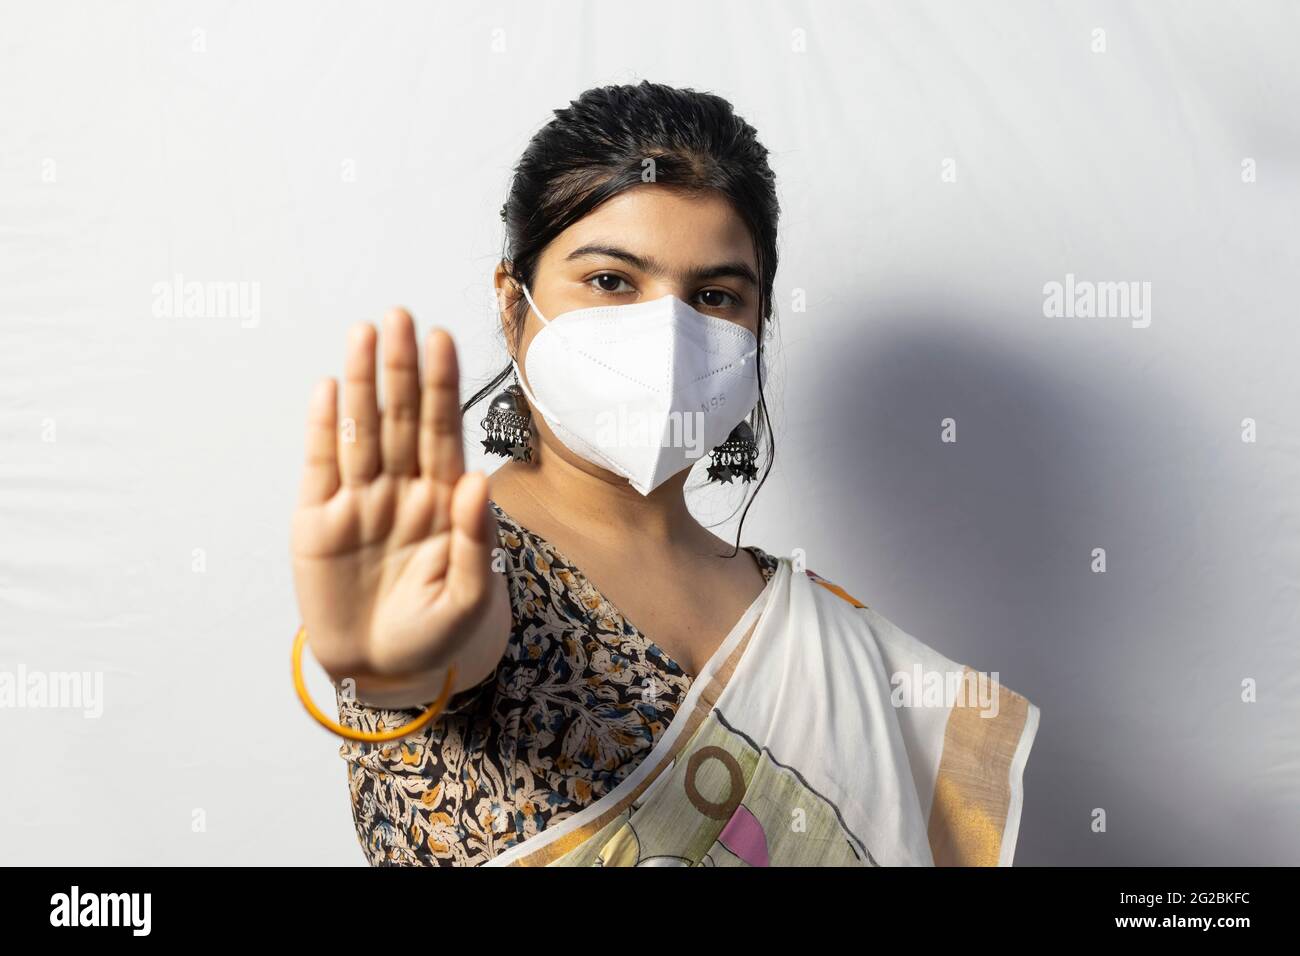 An Indian woman in saree wearing N 95 nose mask showing palm as social distancing on white background Stock Photo